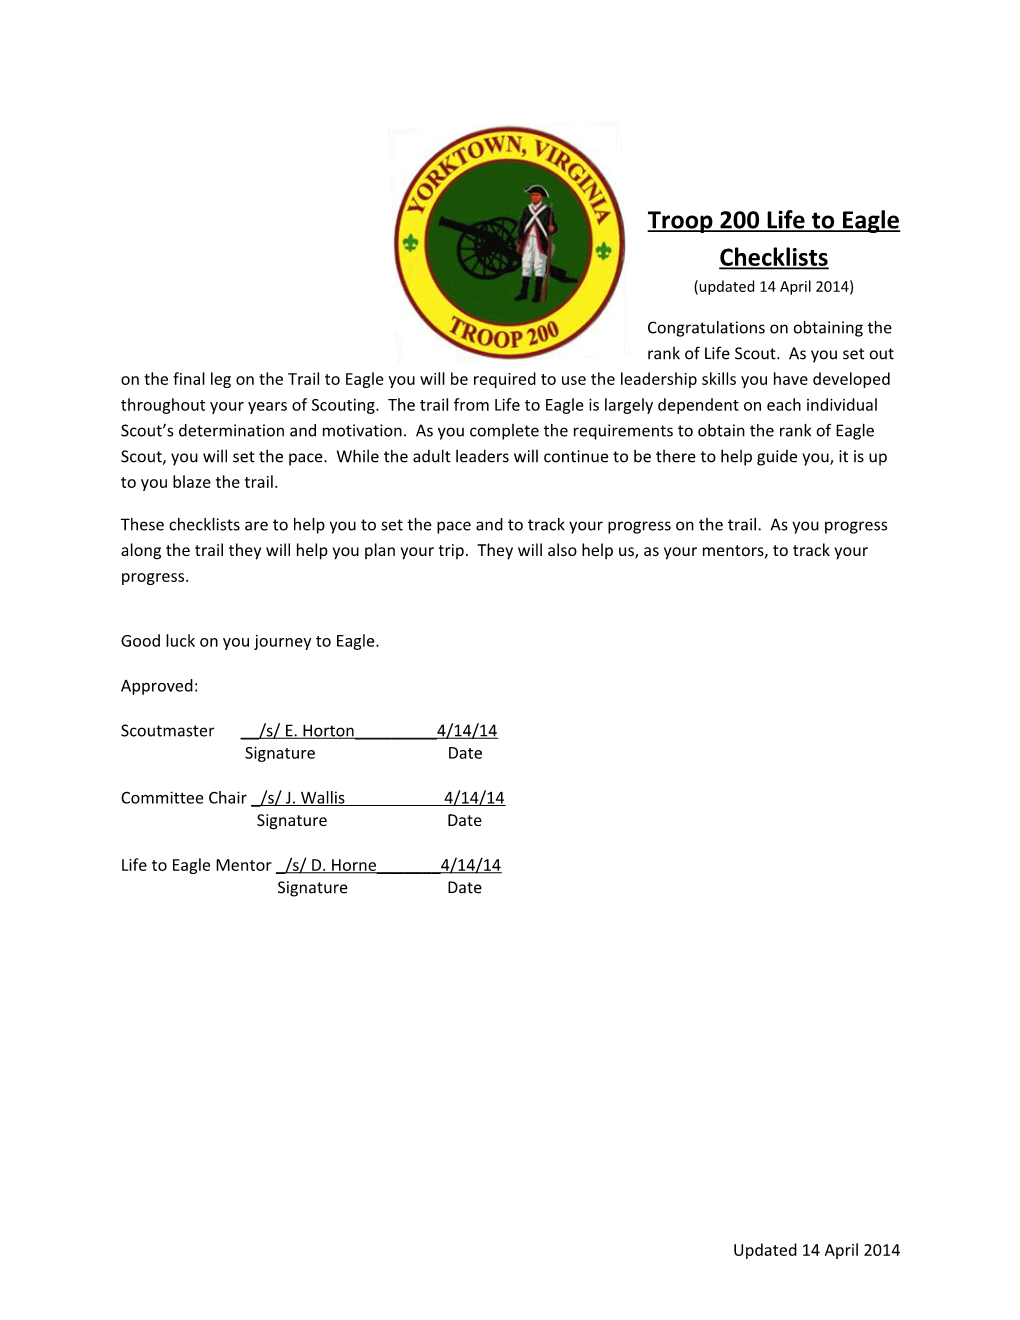 Troop 200 Life to Eagle Checklists (Updated 14 April 2014)